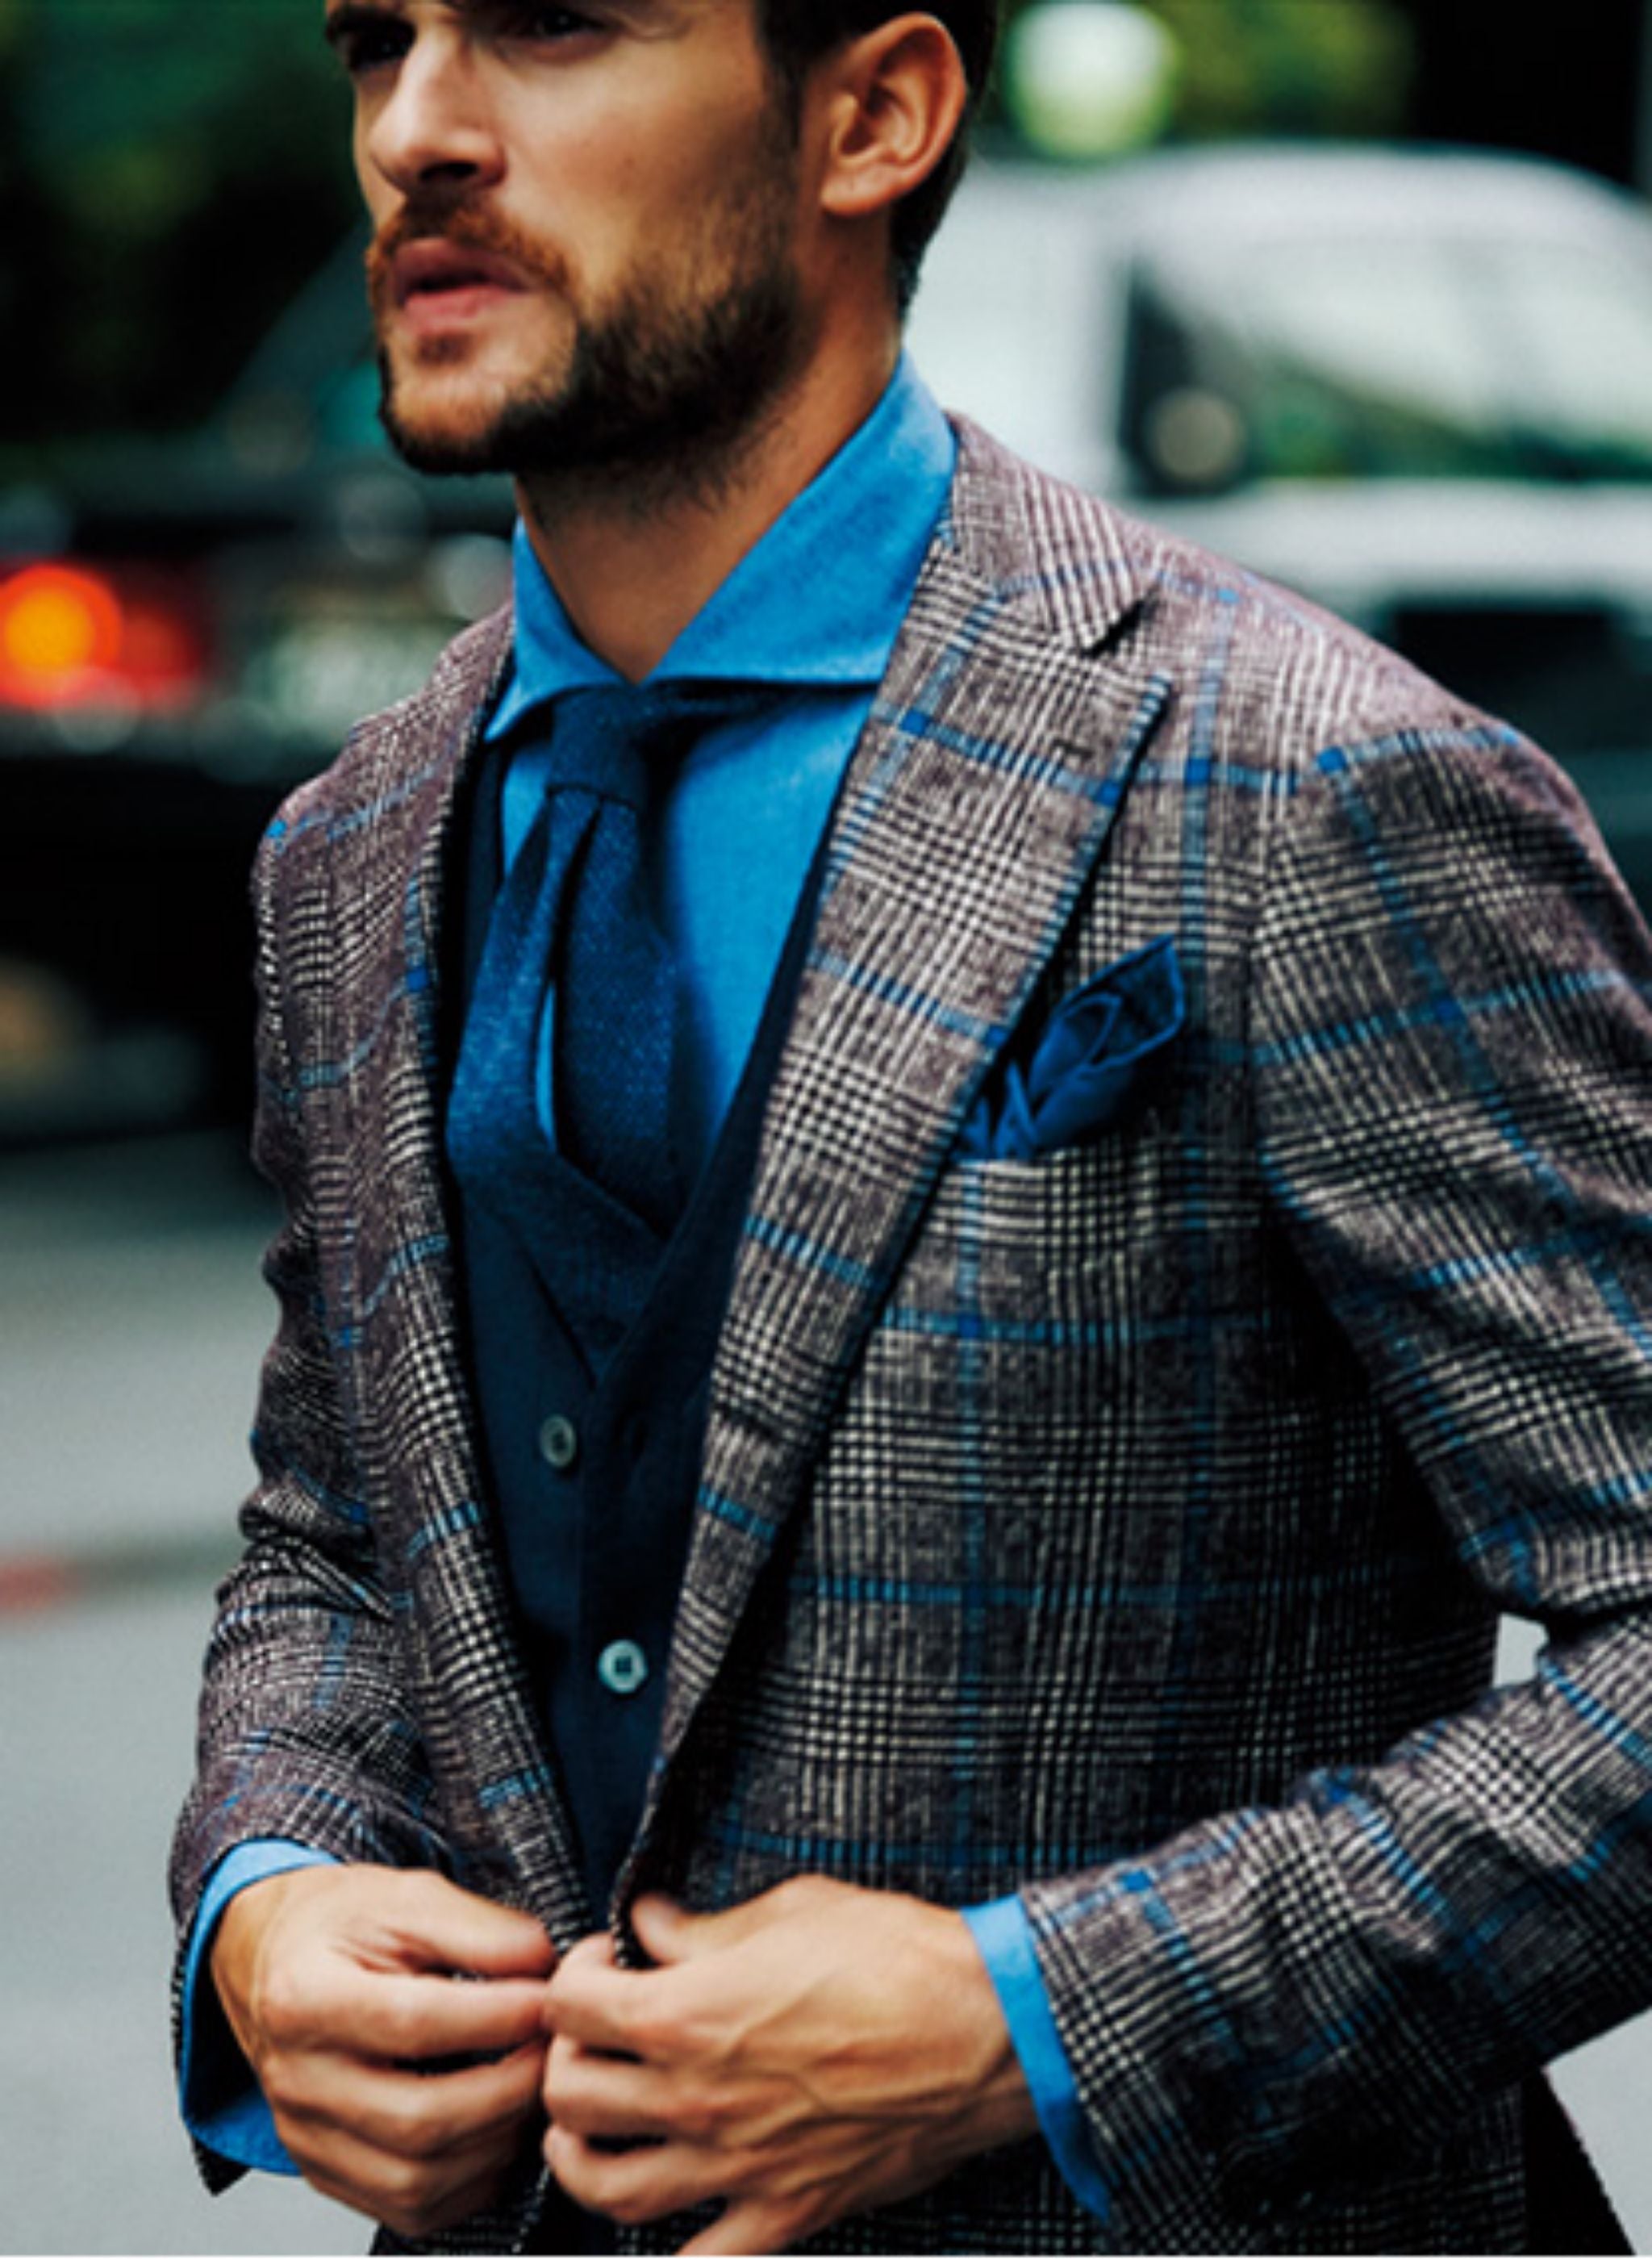 Perfect seasonal layering with a bold sport, cardigan, wool tie and denim shirt.